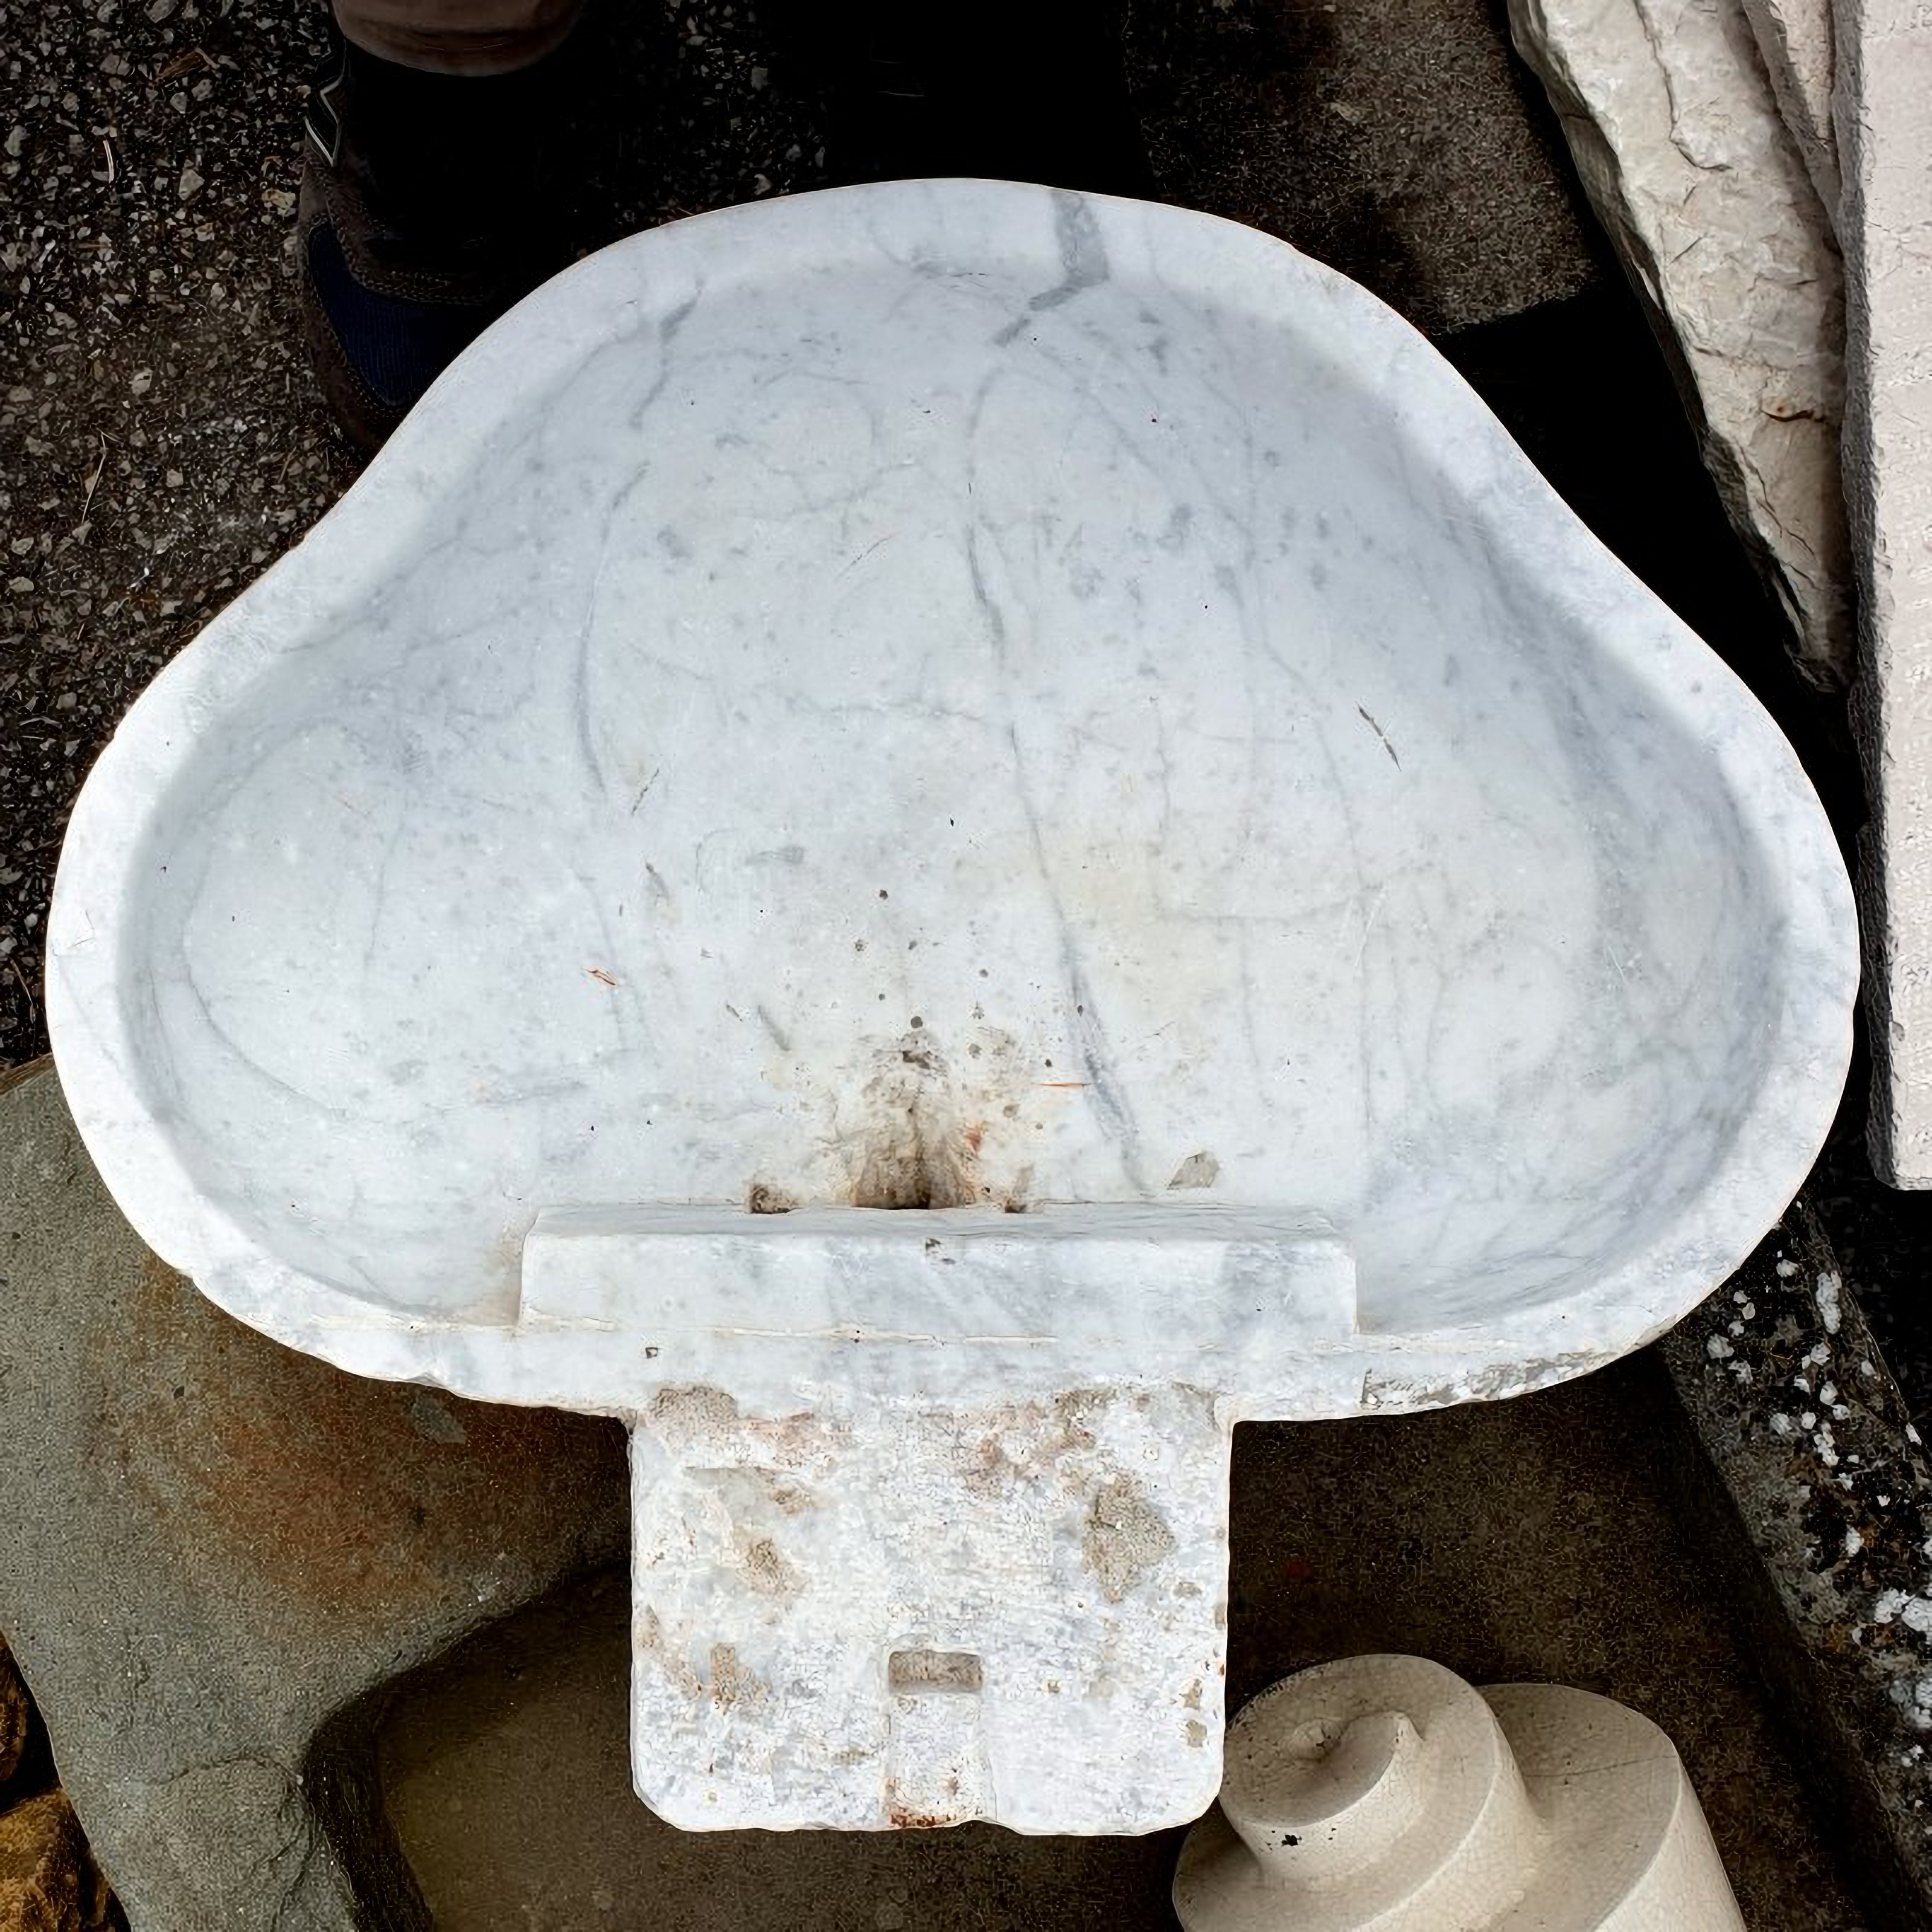 ANTIQUE ITALIAN TRILOBE SINK IN WHITE CARRARA MARBLE 18th Century

Rare original antique Italian sink, in white Carrara marble.
The trefoil sinks are difficult to find, this example is from the 18th century

HEIGHT 11cm
WIDTH 51cm
DEPTH